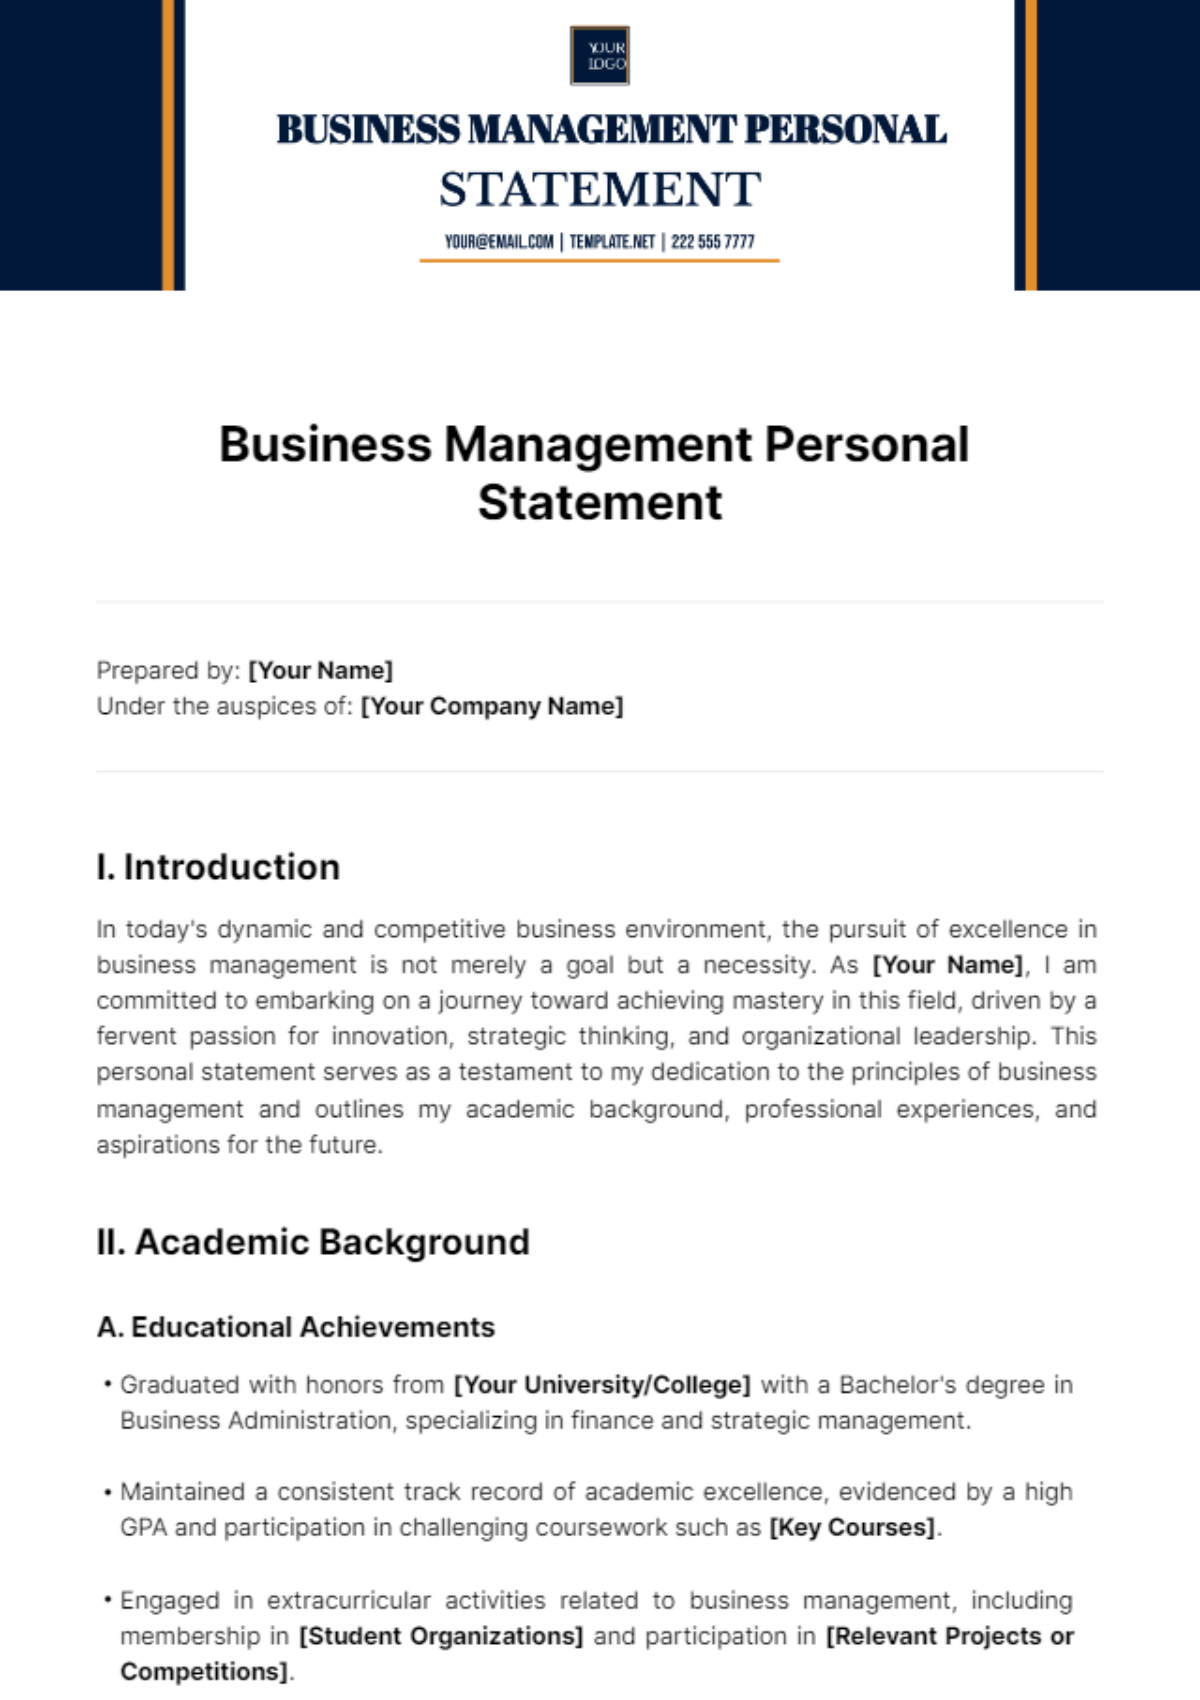 Business Management Personal Statement Template